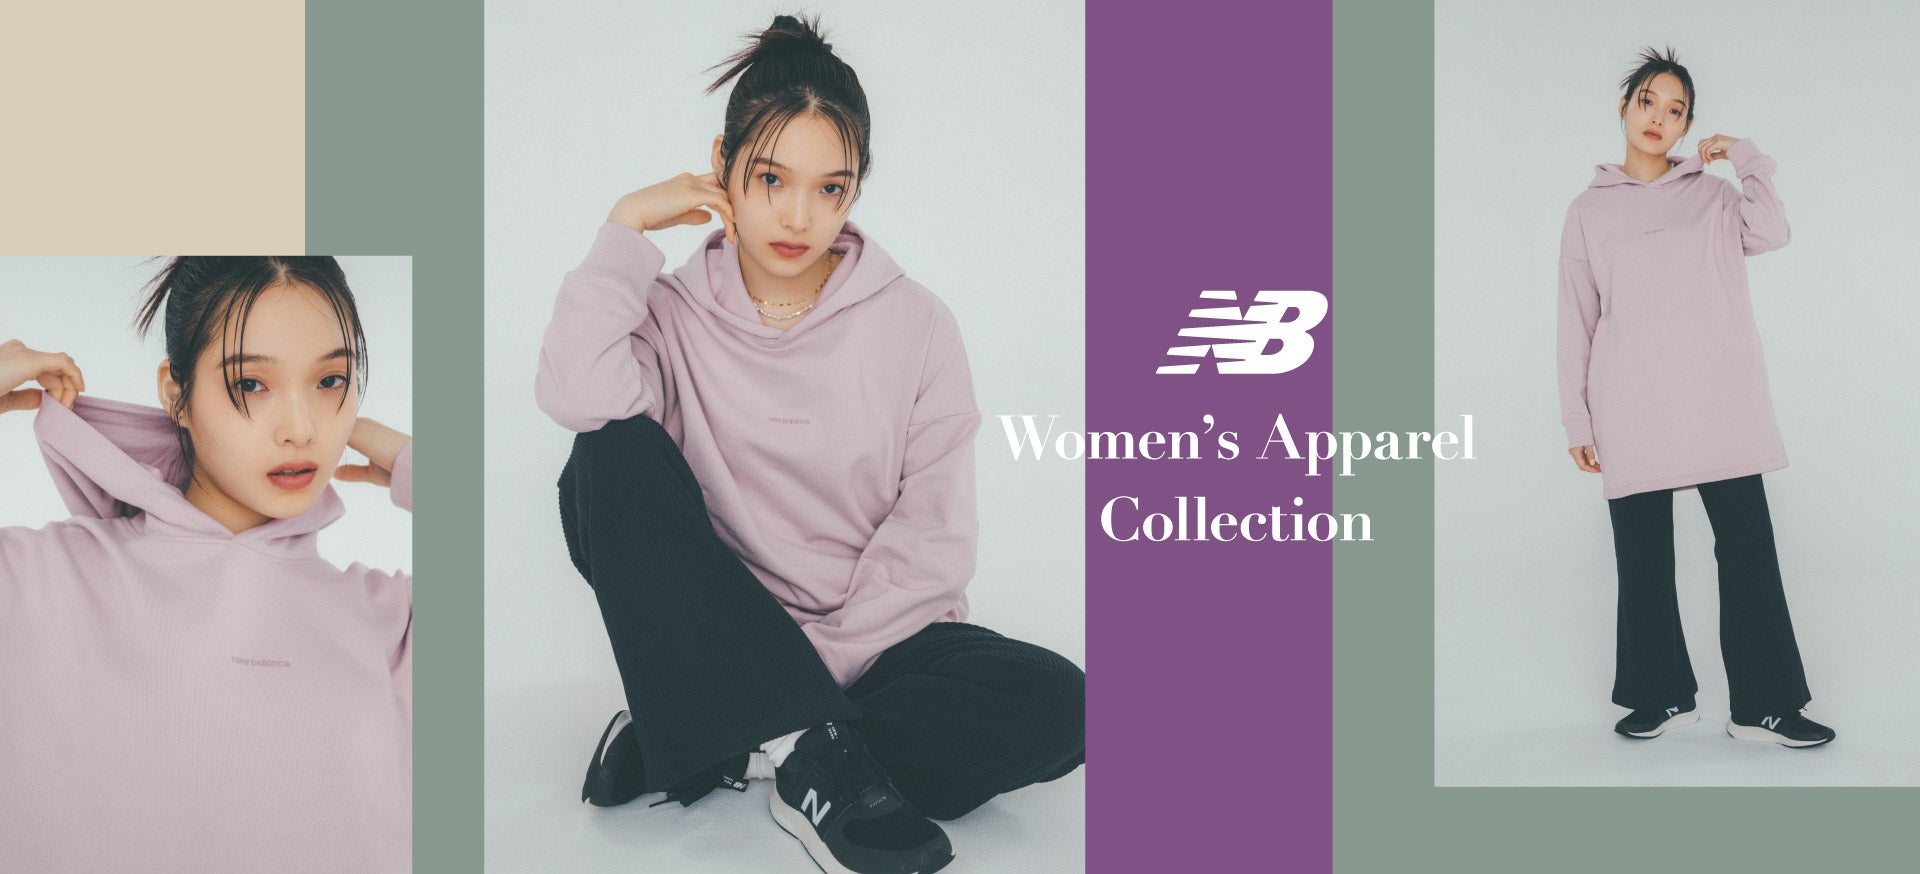 NB, Women's Apparel Collection